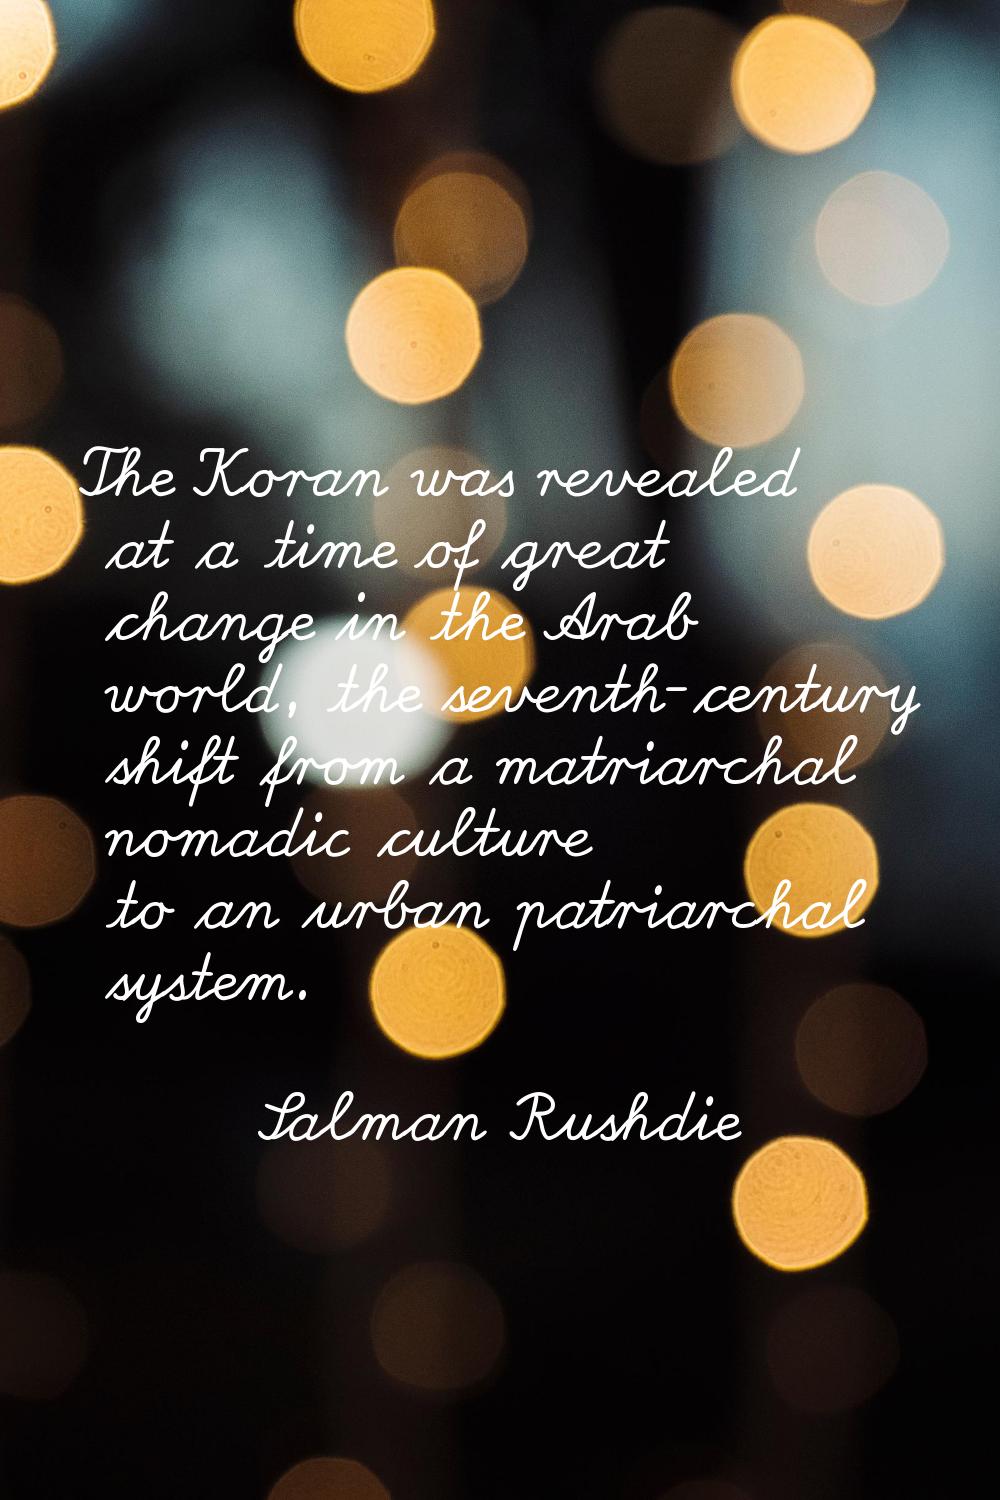 The Koran was revealed at a time of great change in the Arab world, the seventh-century shift from 